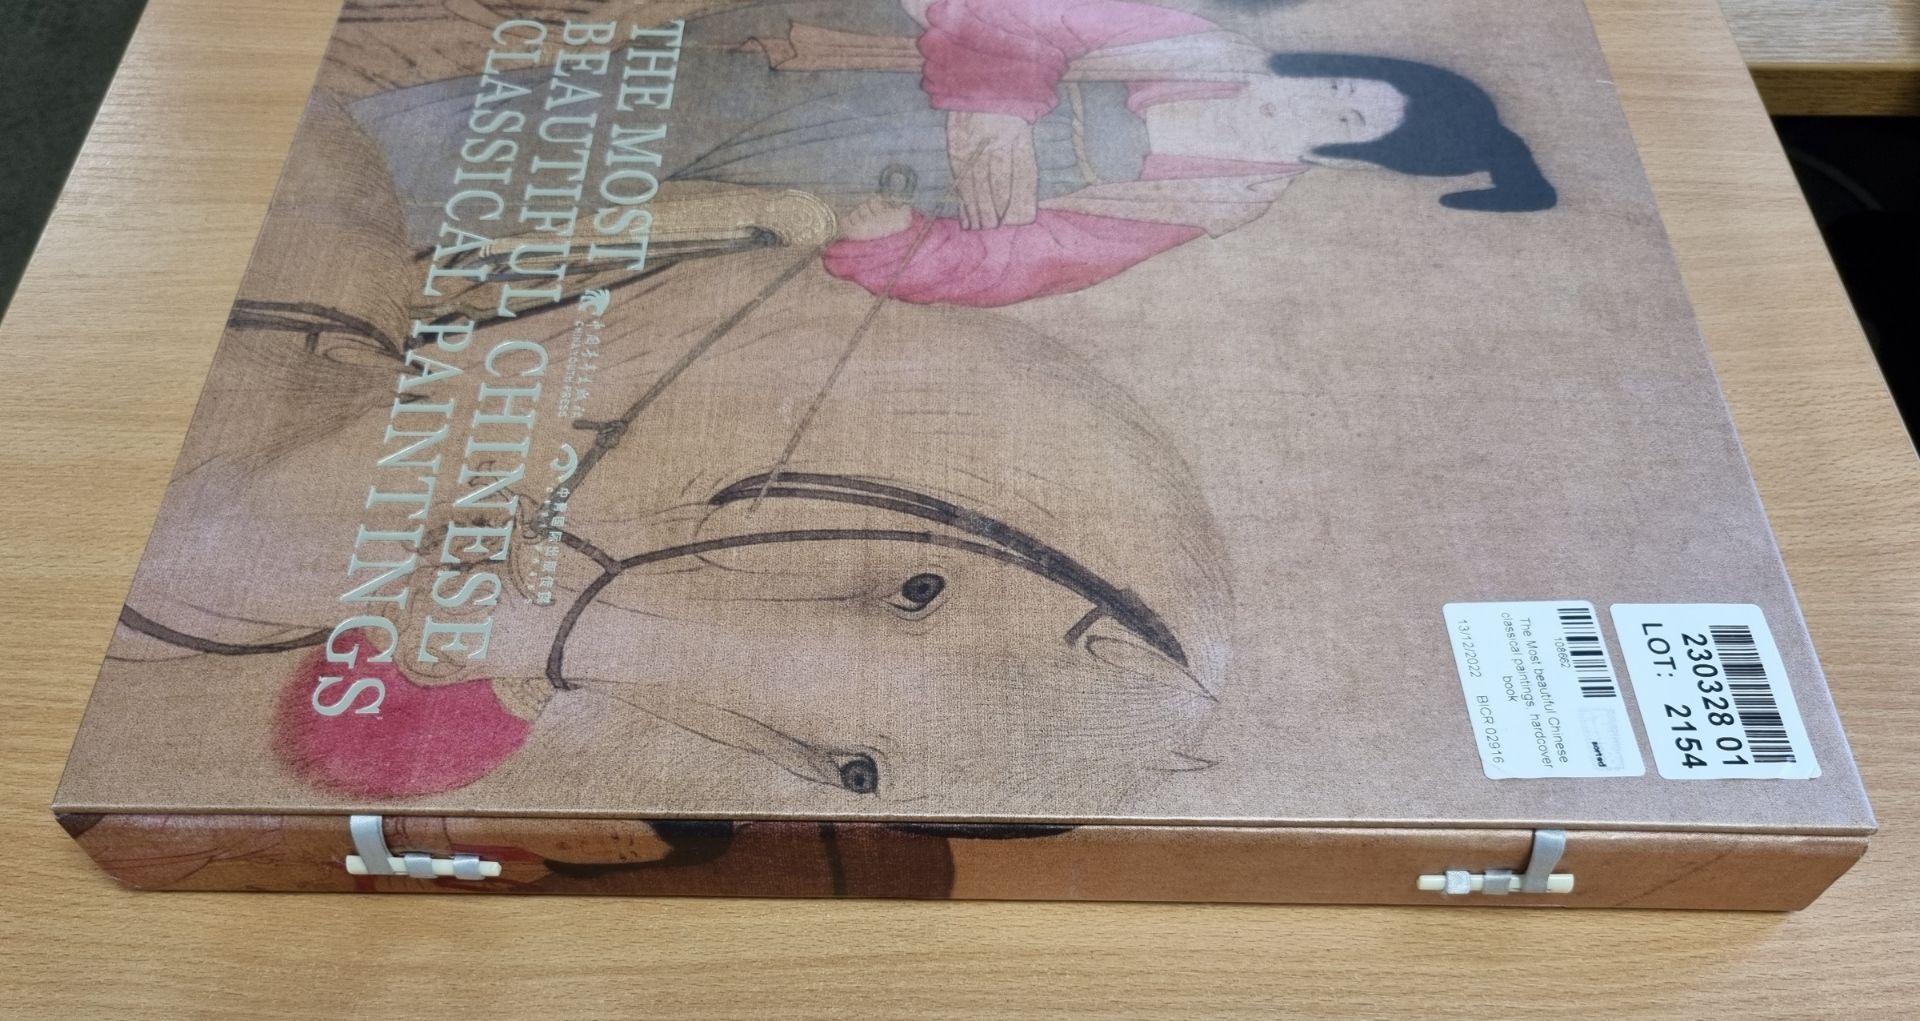 The Most beautiful Chinese classical paintings hardcover book - Image 2 of 7